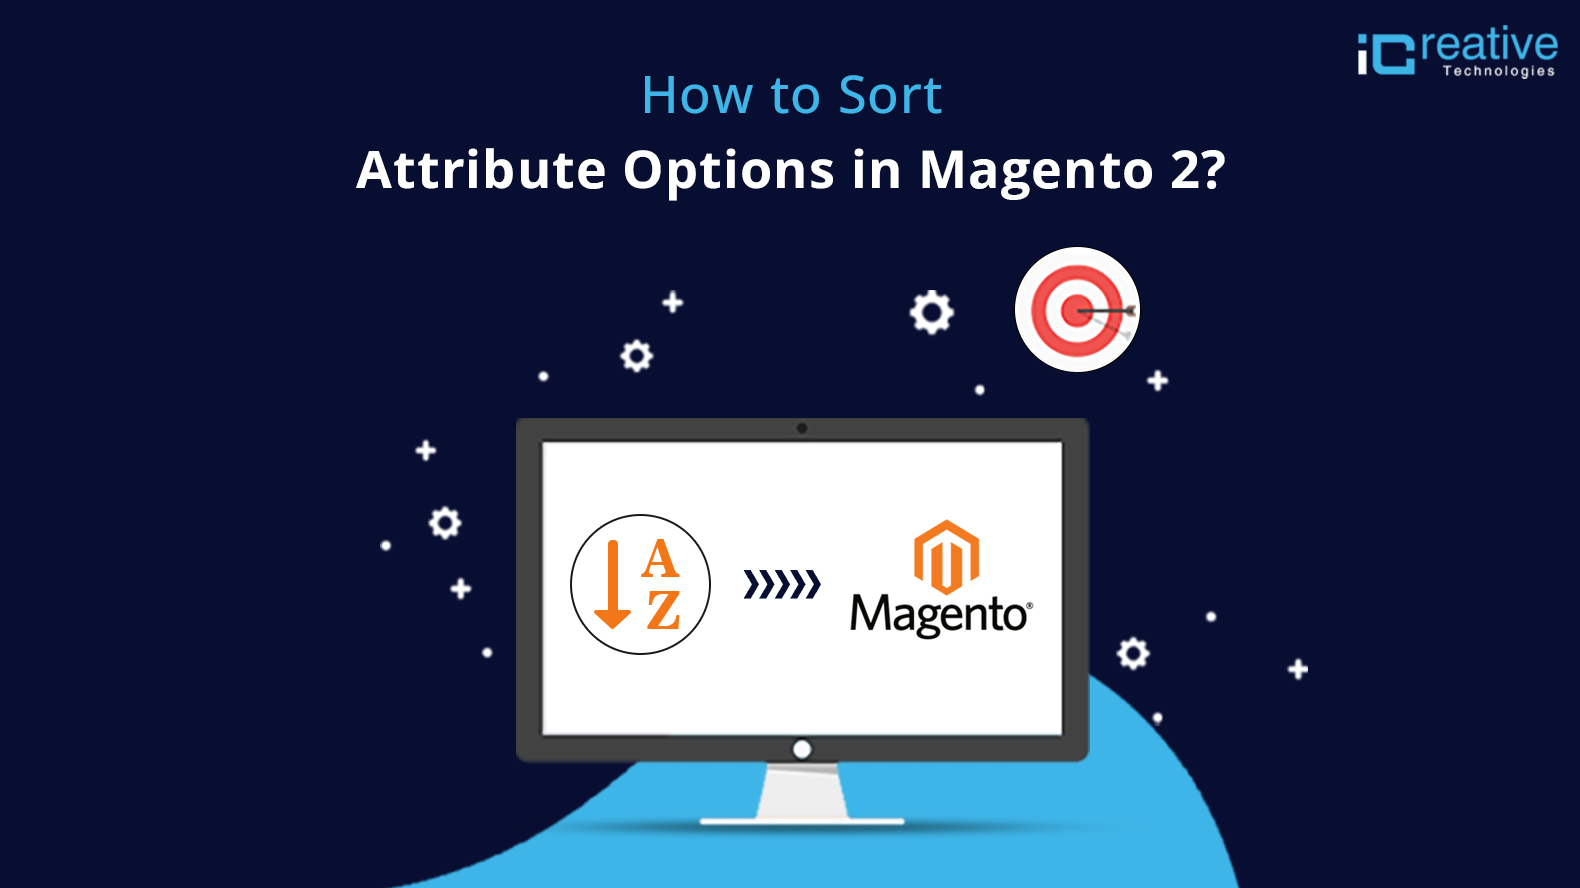 How to Sort Attribute Options in Magento 2?